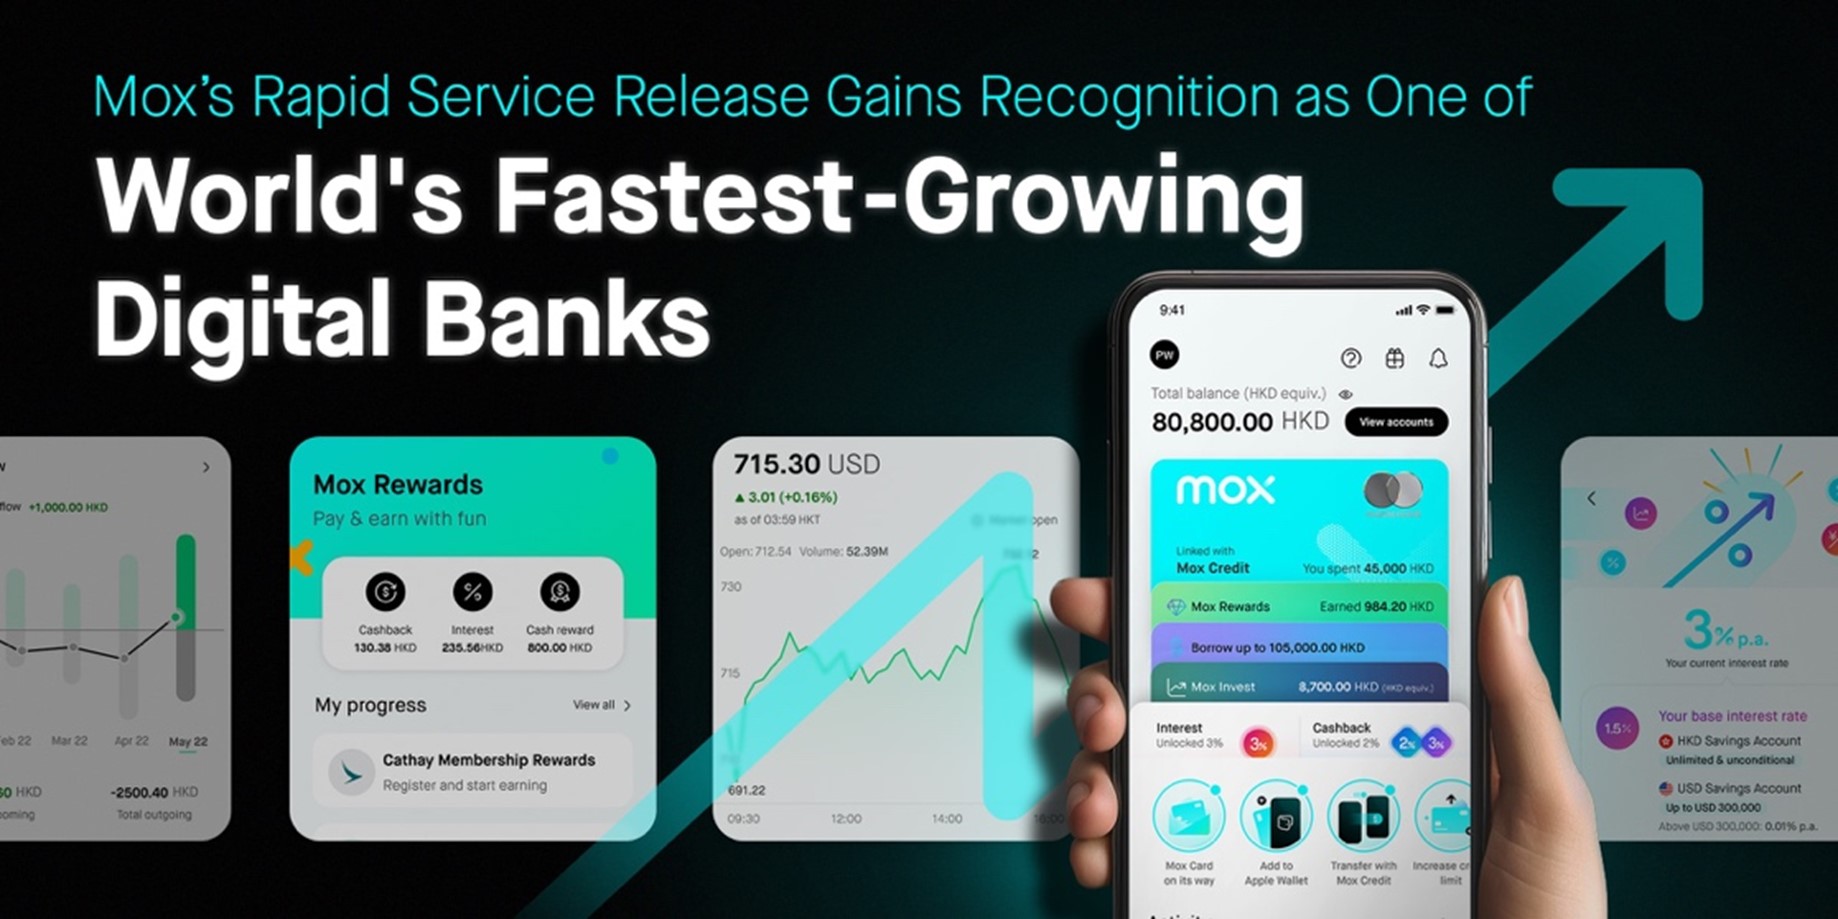 Moxs Rapid Service Release Gains Recognition as One of Worlds Fastest-Growing Digital Banks